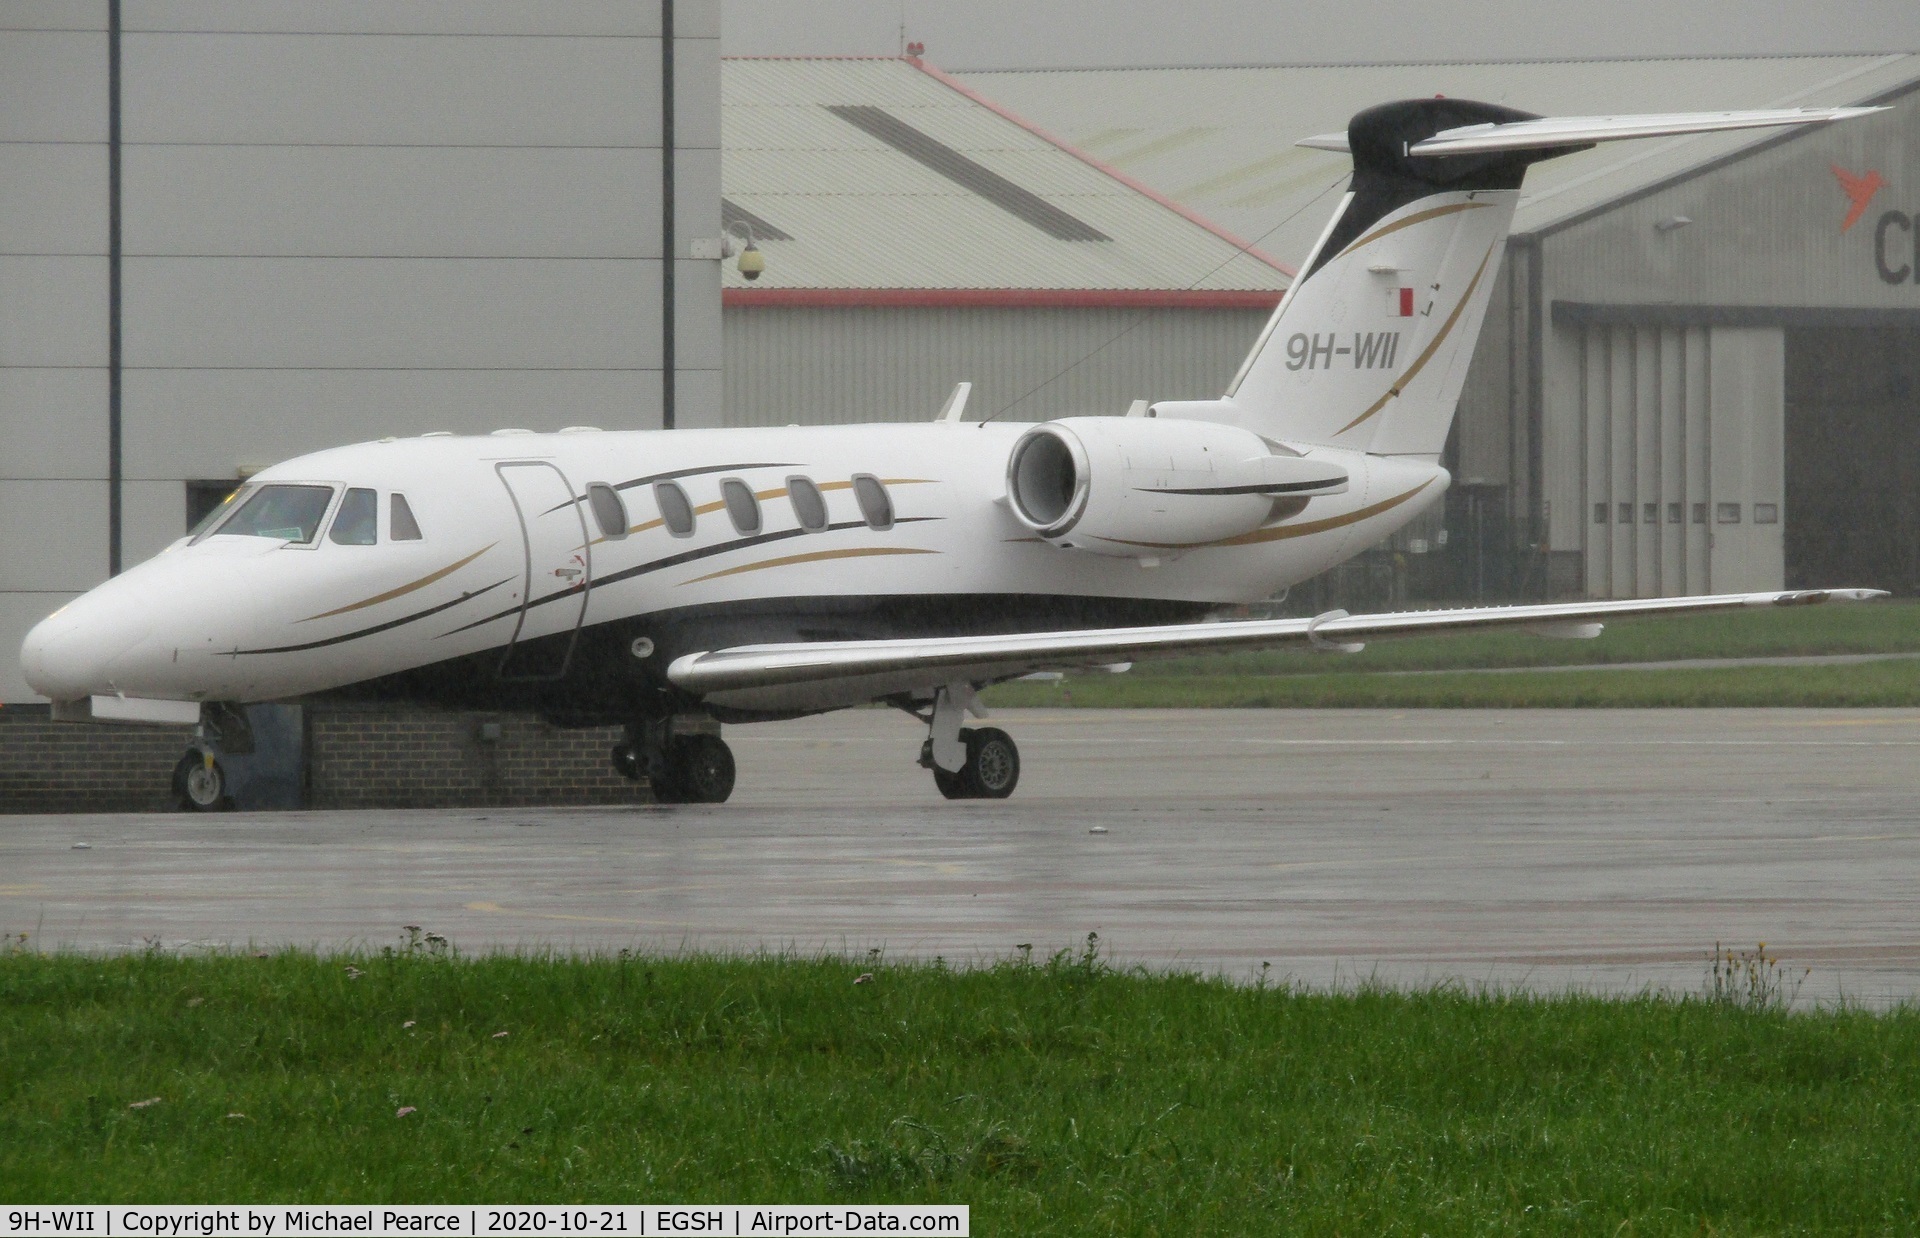 9H-WII, 1998 Cessna 650 Citation VII C/N 650-7090, Visiting SaxonAir from Nice (NCE).